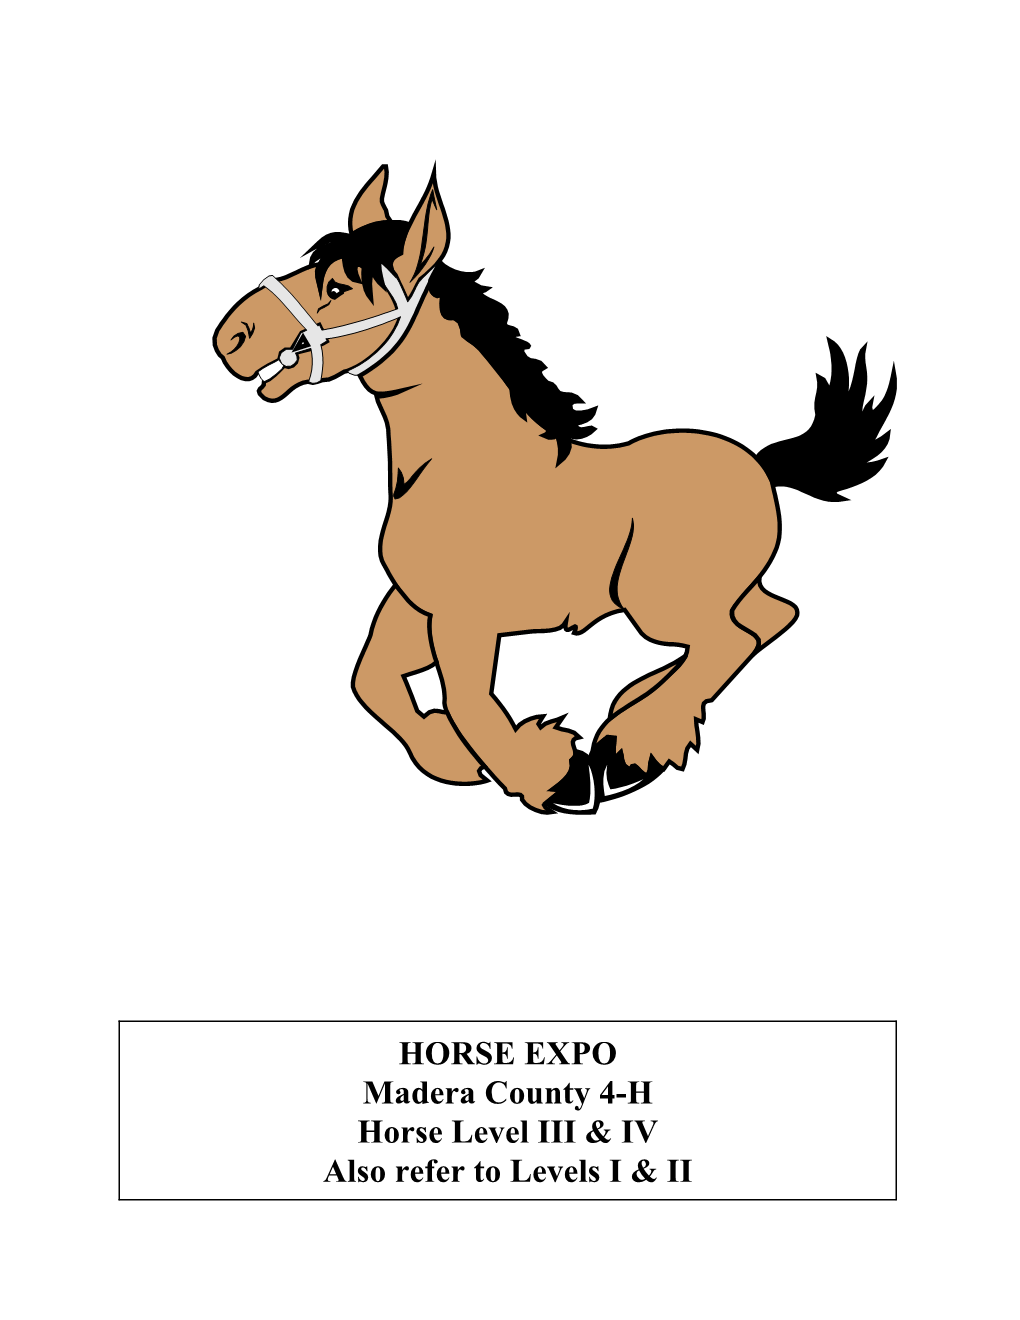 HORSE EXPO Madera County 4-H Horse Level III & IV Also Refer To